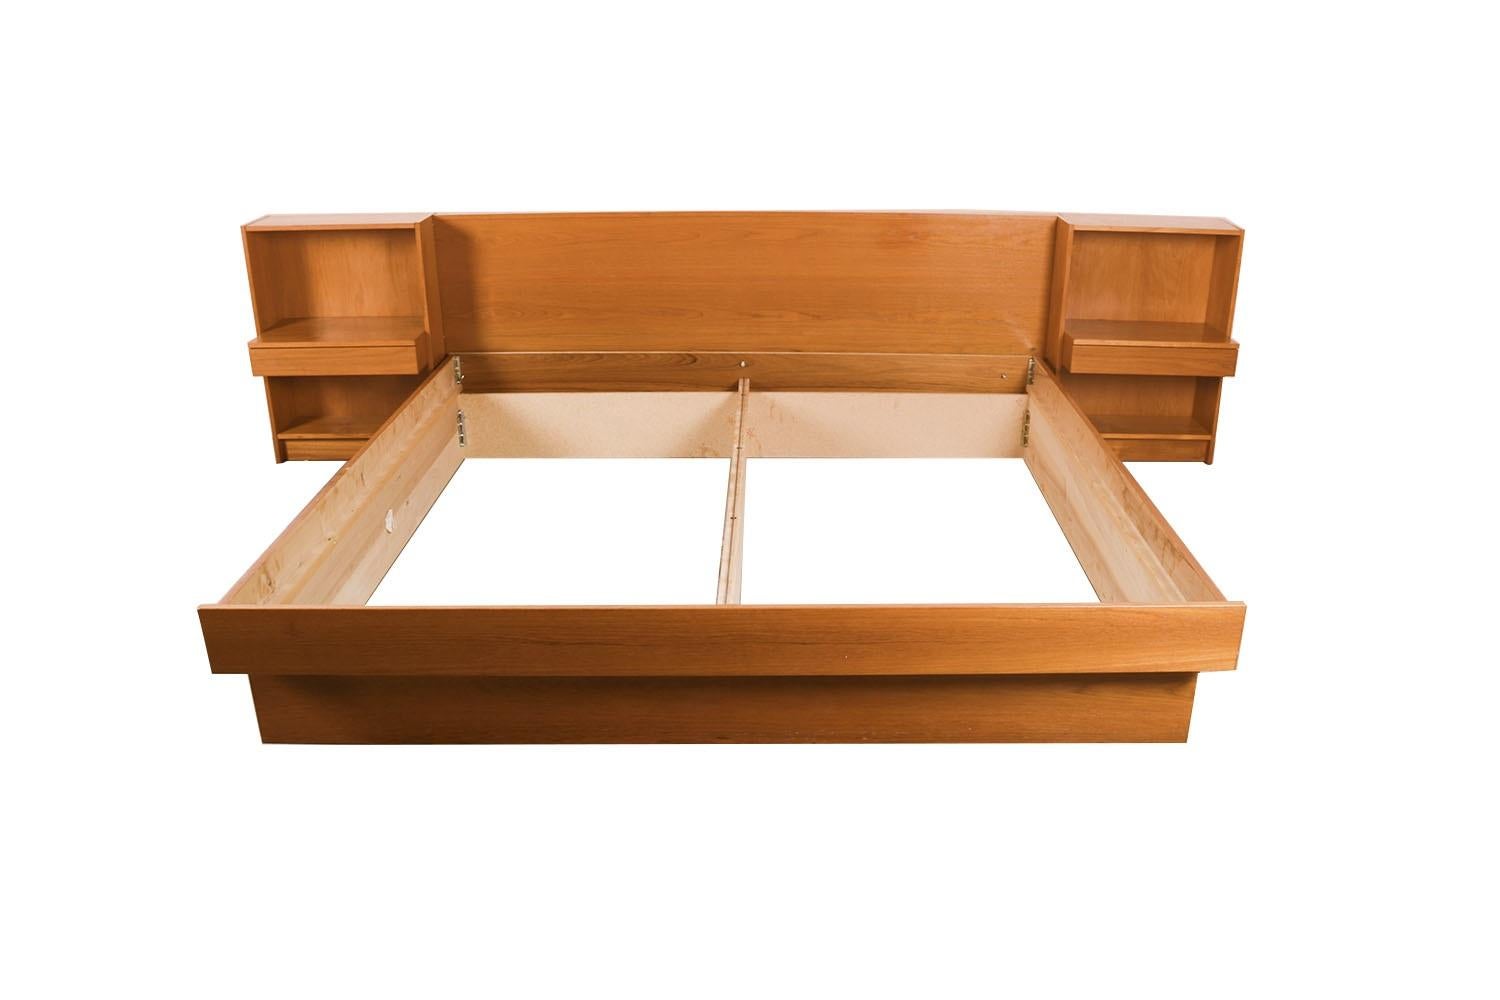 A remarkable Danish teak, mid-century King floating platform bed with nightstands, made in Denmark. Exceptional construction and style. Featuring a stunning headboard with attached nightstands, both with a wide surface area for placement of